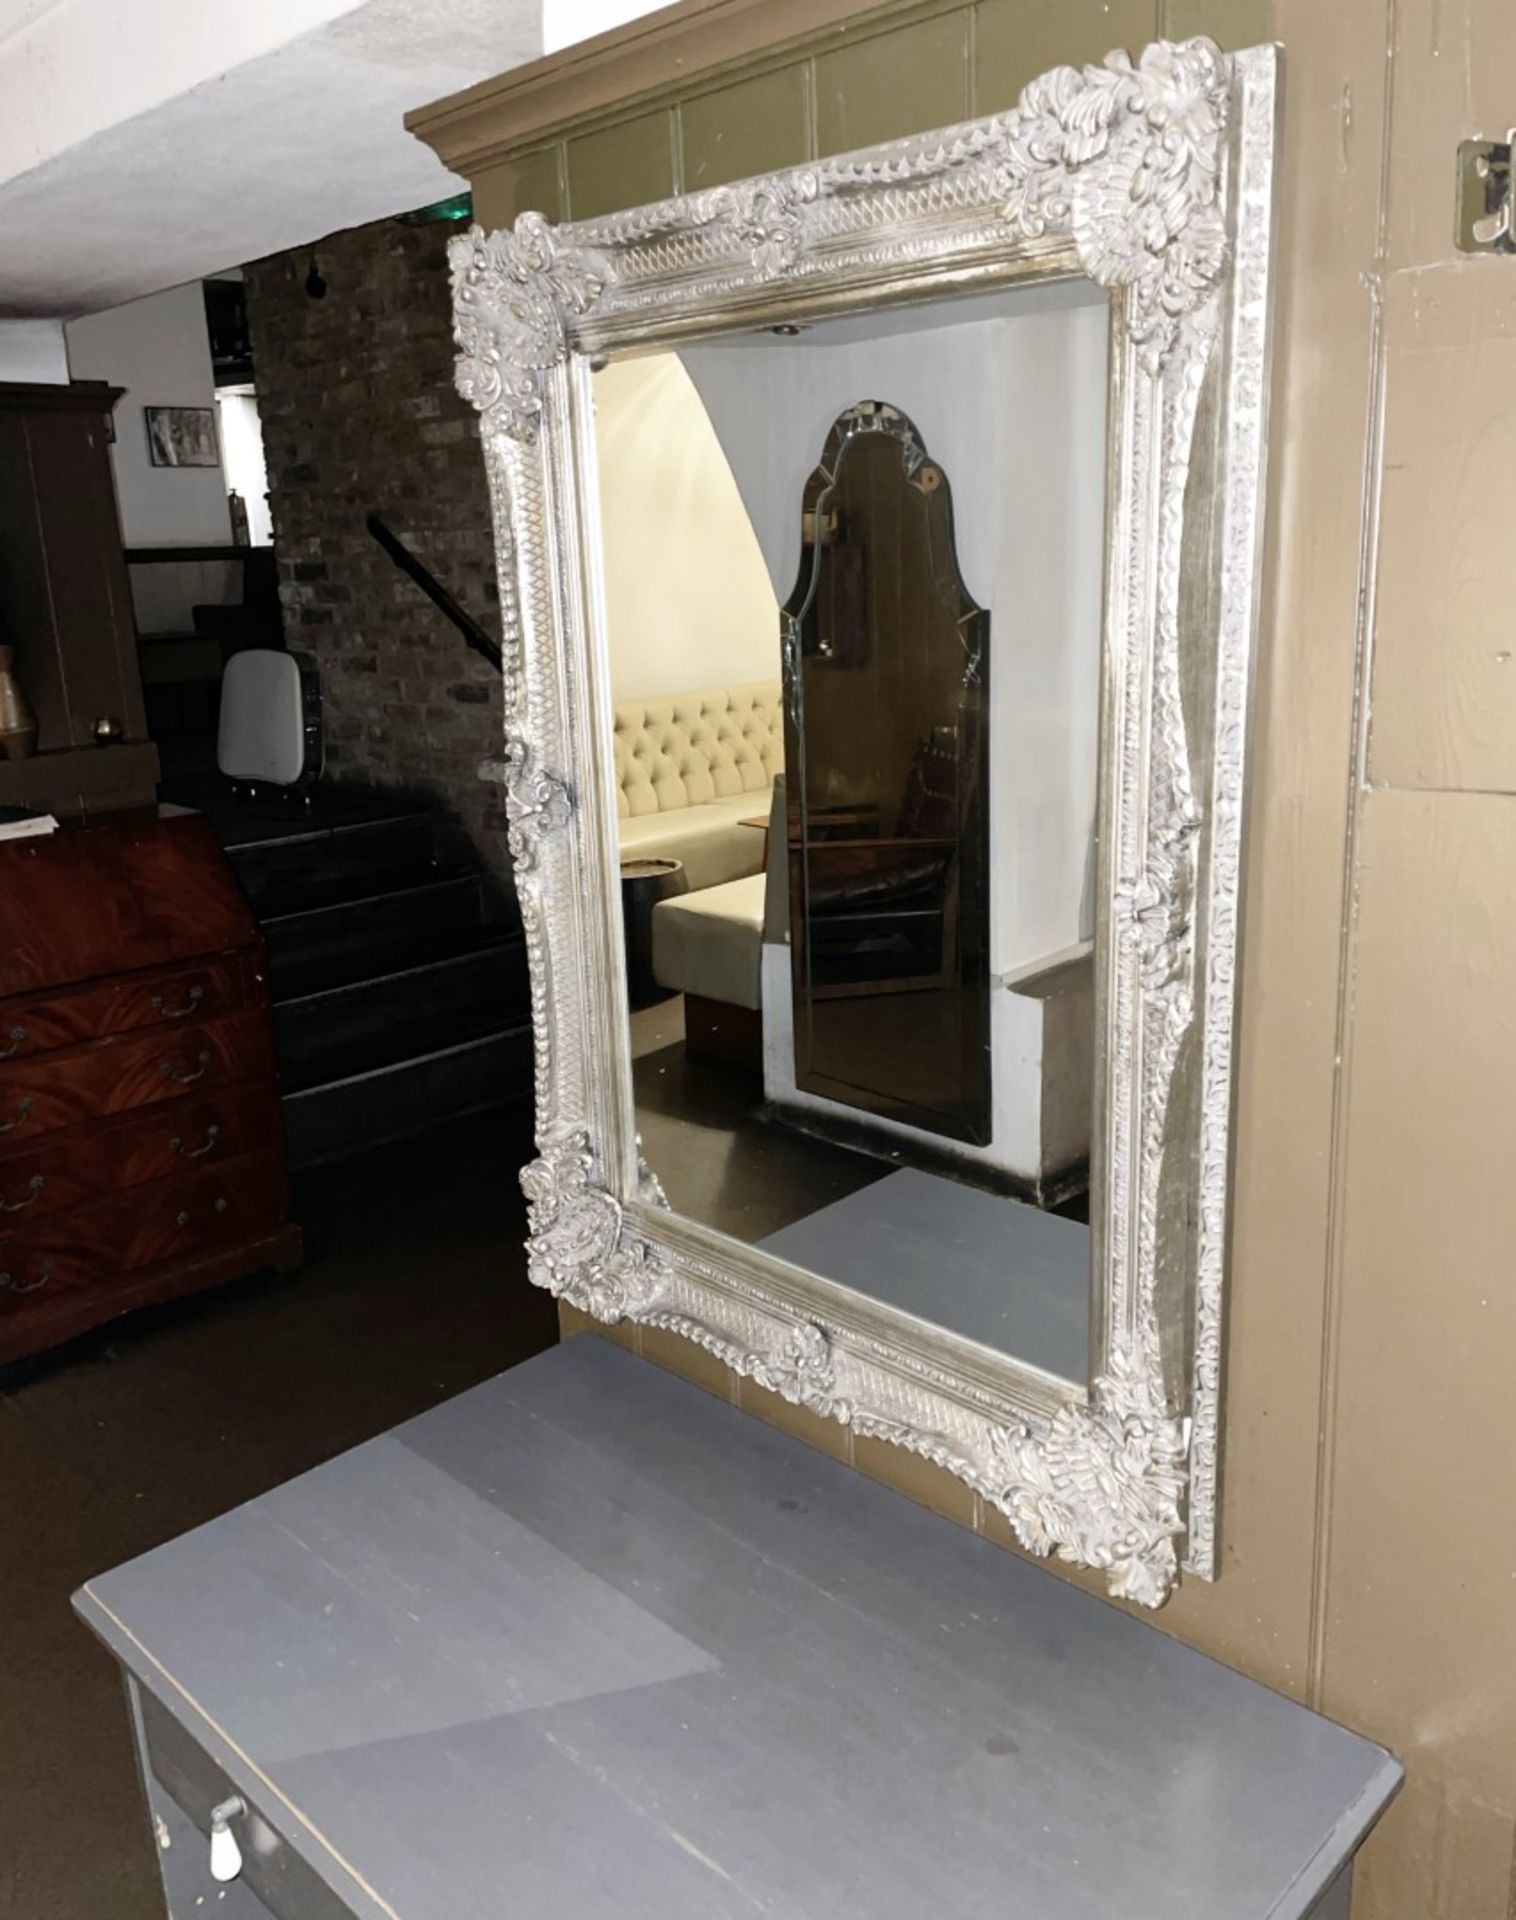 1 x Large Ornate Antique-style Painted Wall Mirror with Distressed Wooden Cabinet in Grey - Image 3 of 9